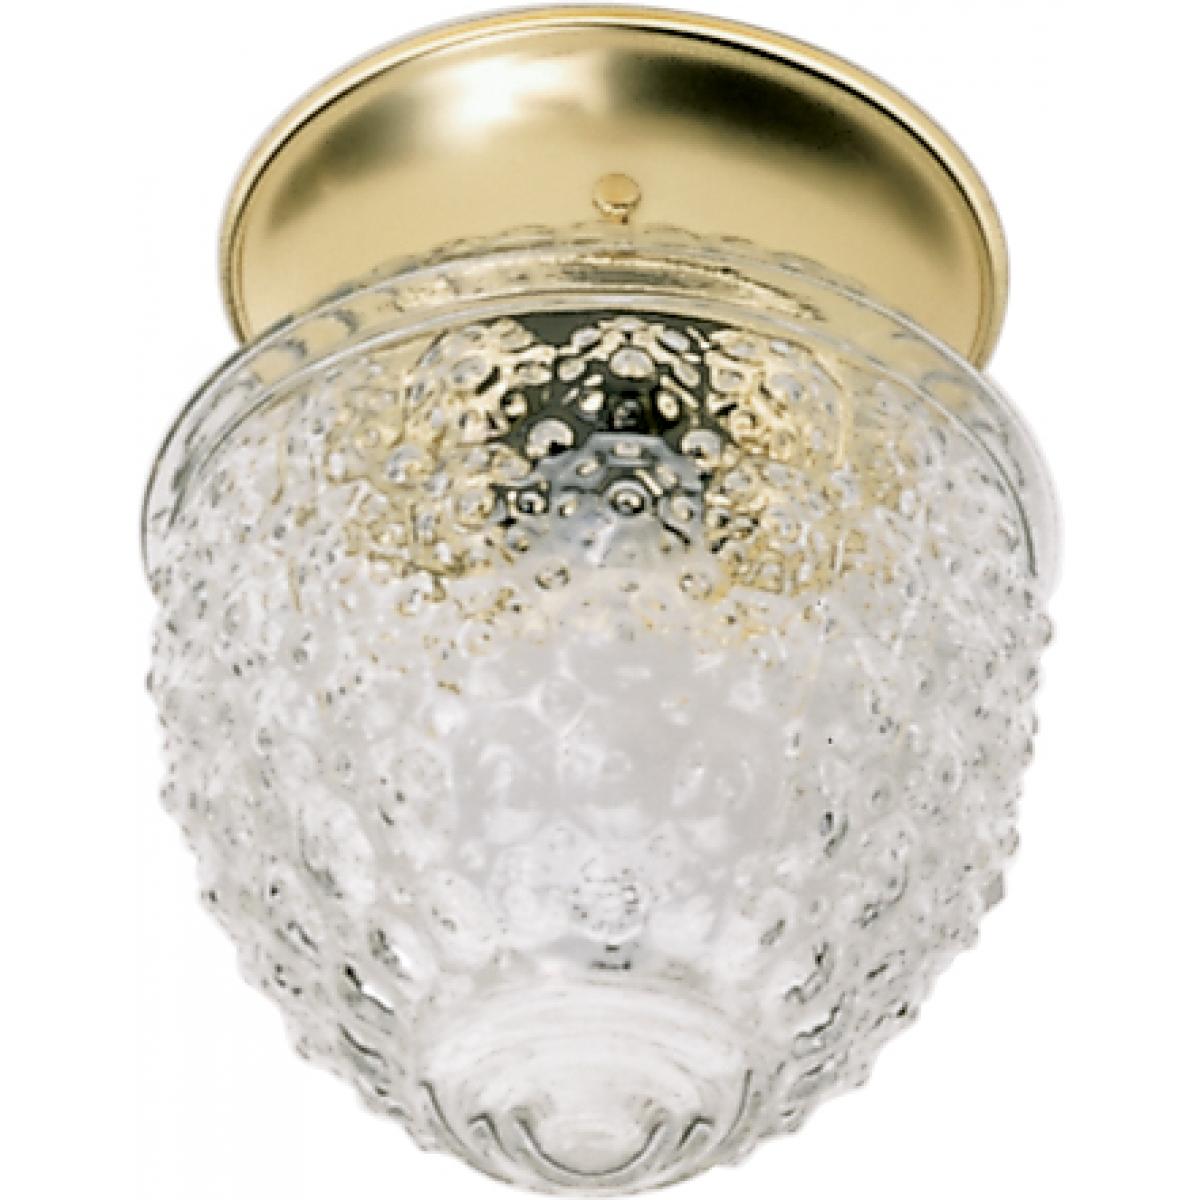 Satco 77-125 1 Light - 6" - Ceiling Fixture - Clear Pineapple Glass - Polished Brass Finish